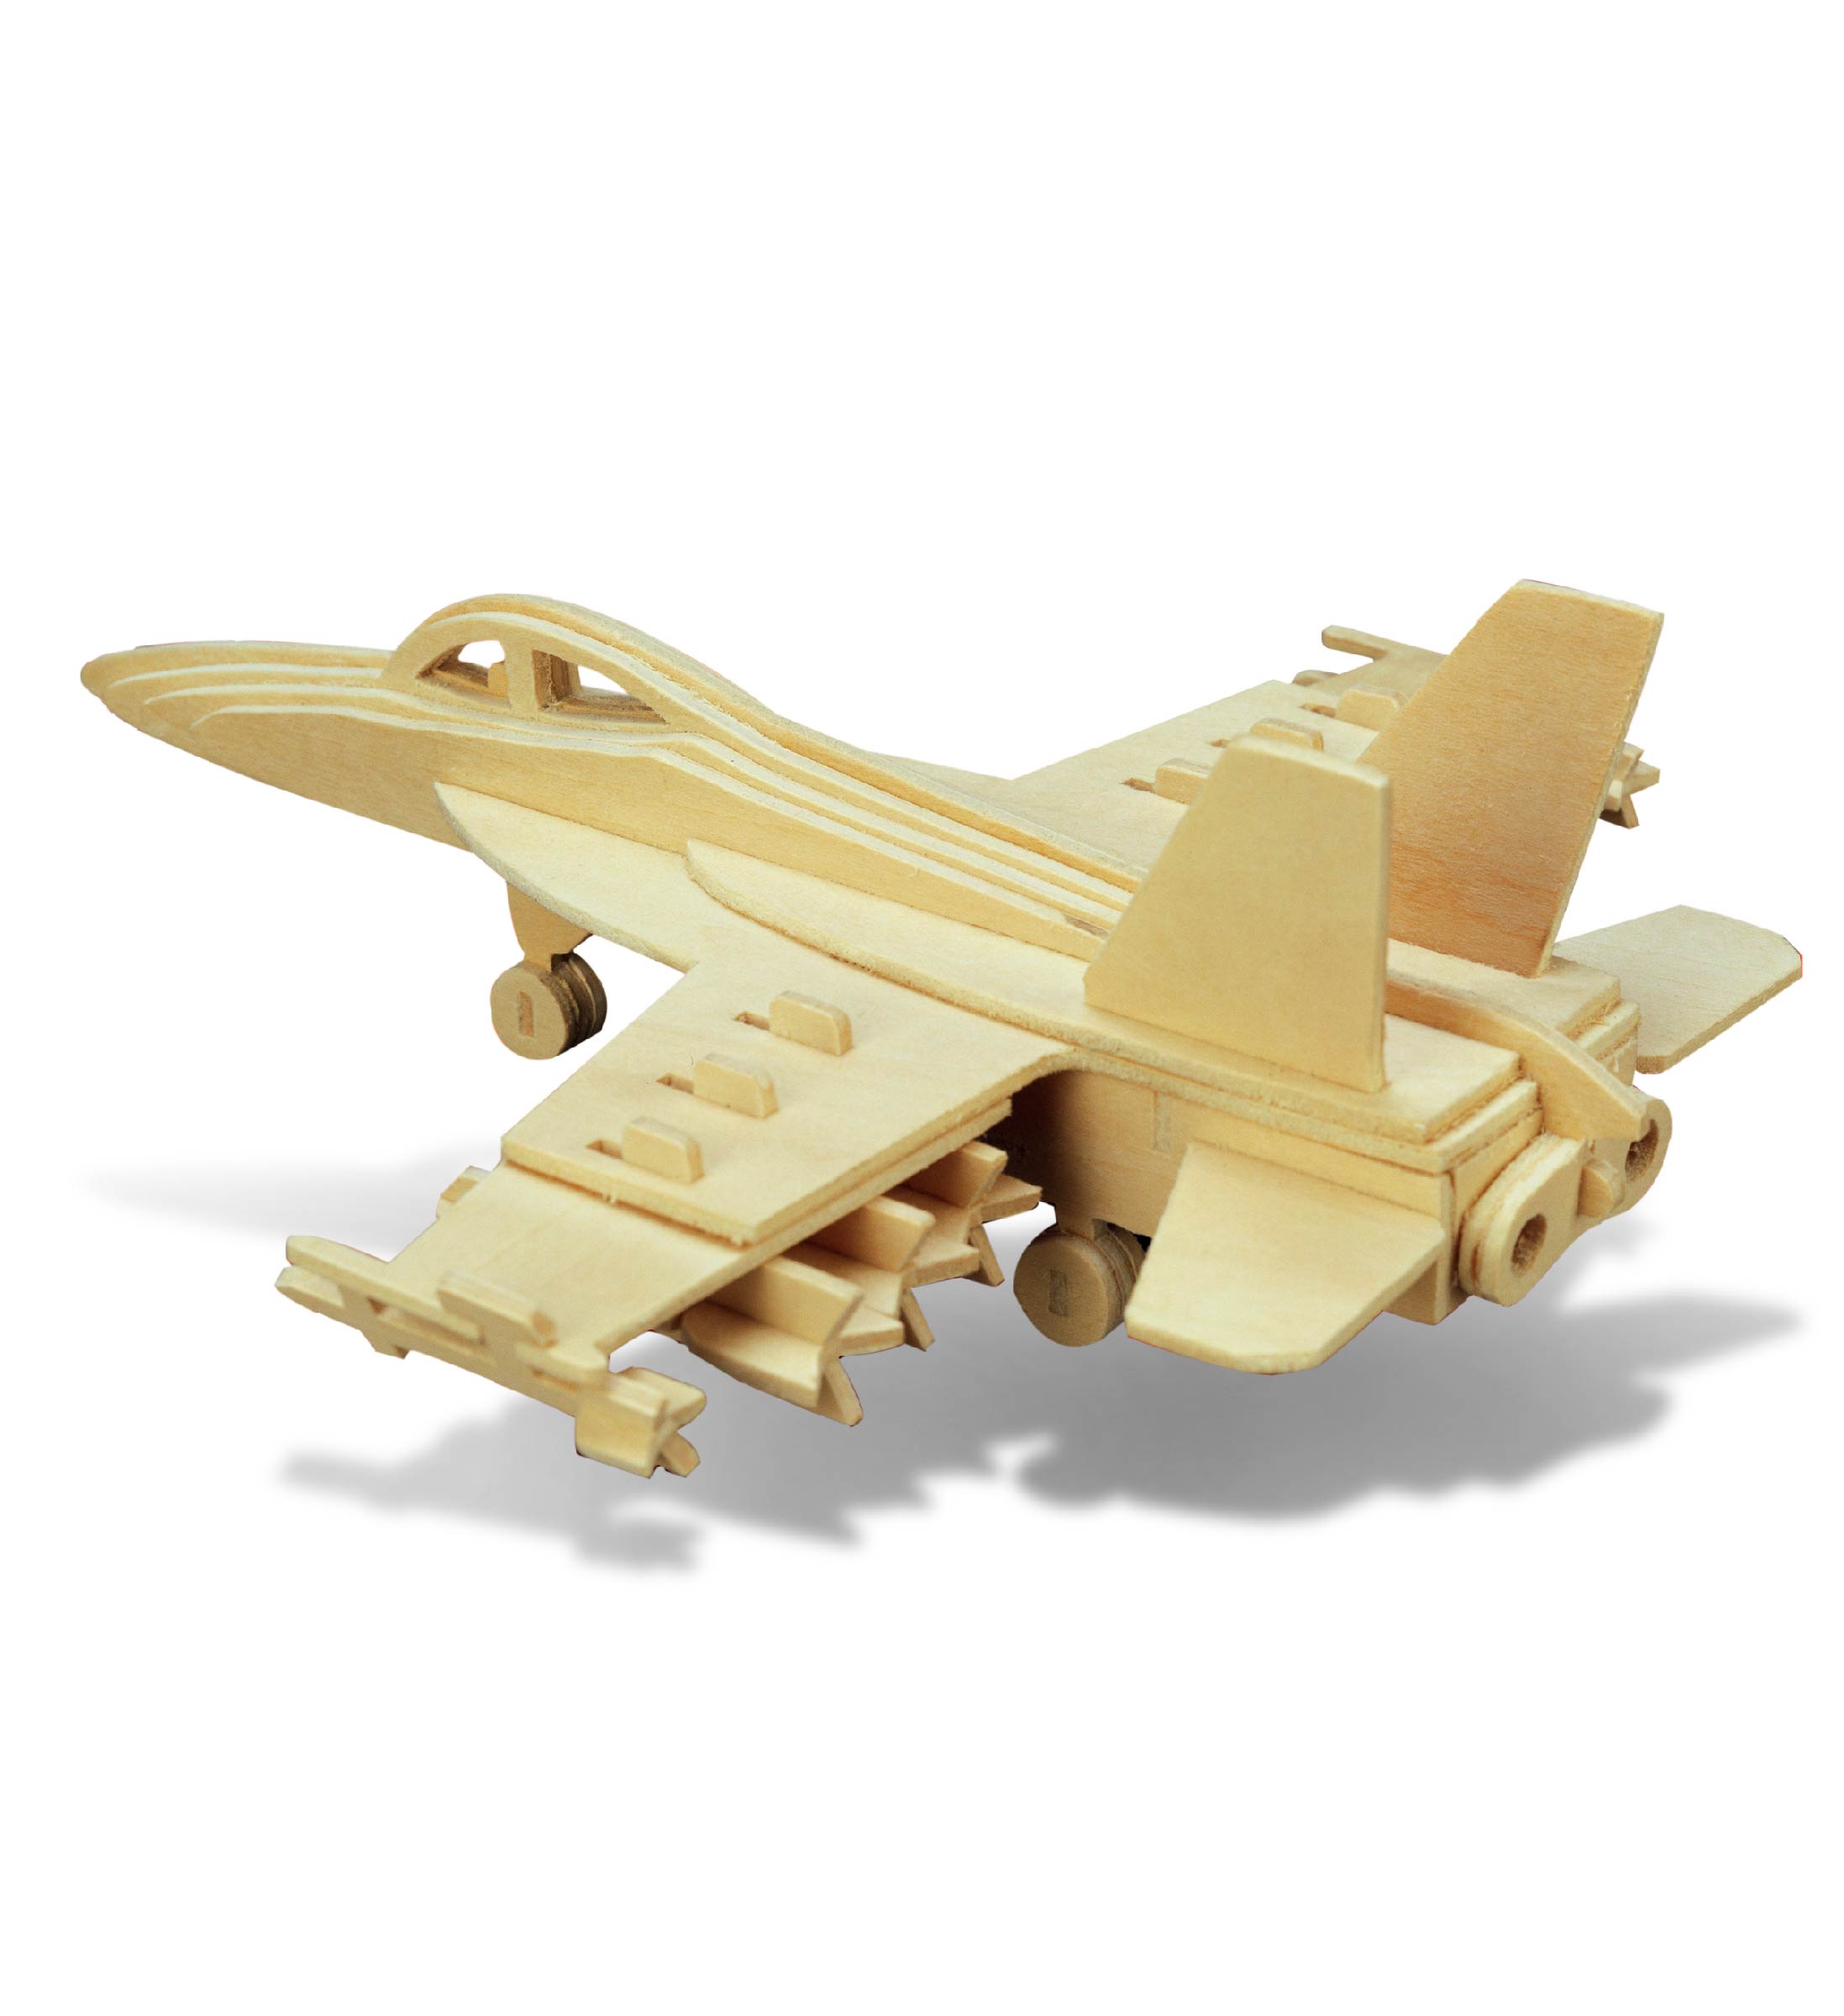 Puzzled F-18 Hornet 3D Puzzle Airplane Model Wood Building Kit - 3D Model Airplane Building Kit for Kids and Adults, Fun Educational Model Plane Kit to Paint and Build Craft 3D Model Kit - 47 Pieces - image 1 of 7